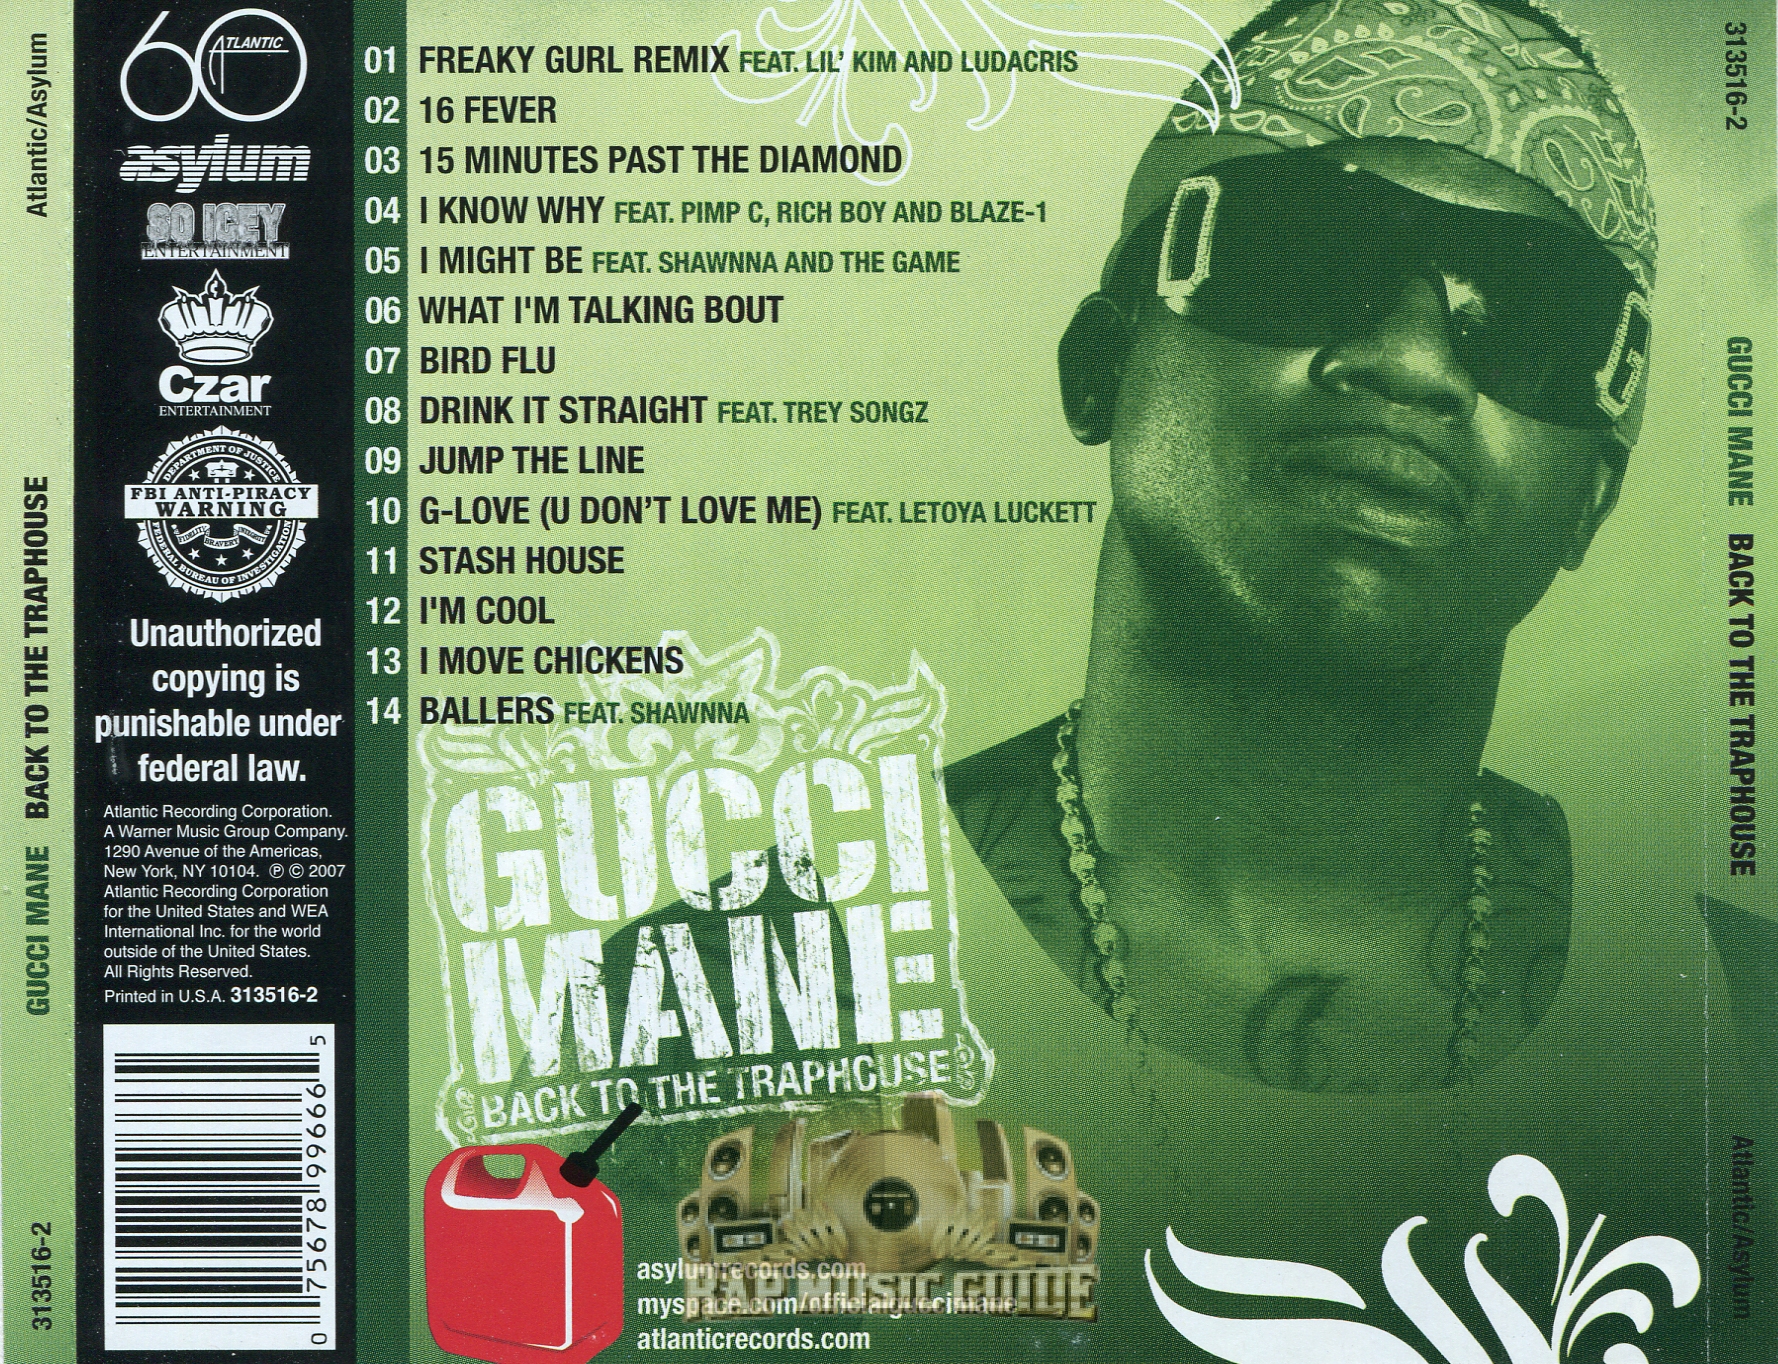 Freaky Gurl (Remix) by Gucci Mane feat. Lil' Kim and Ludacris